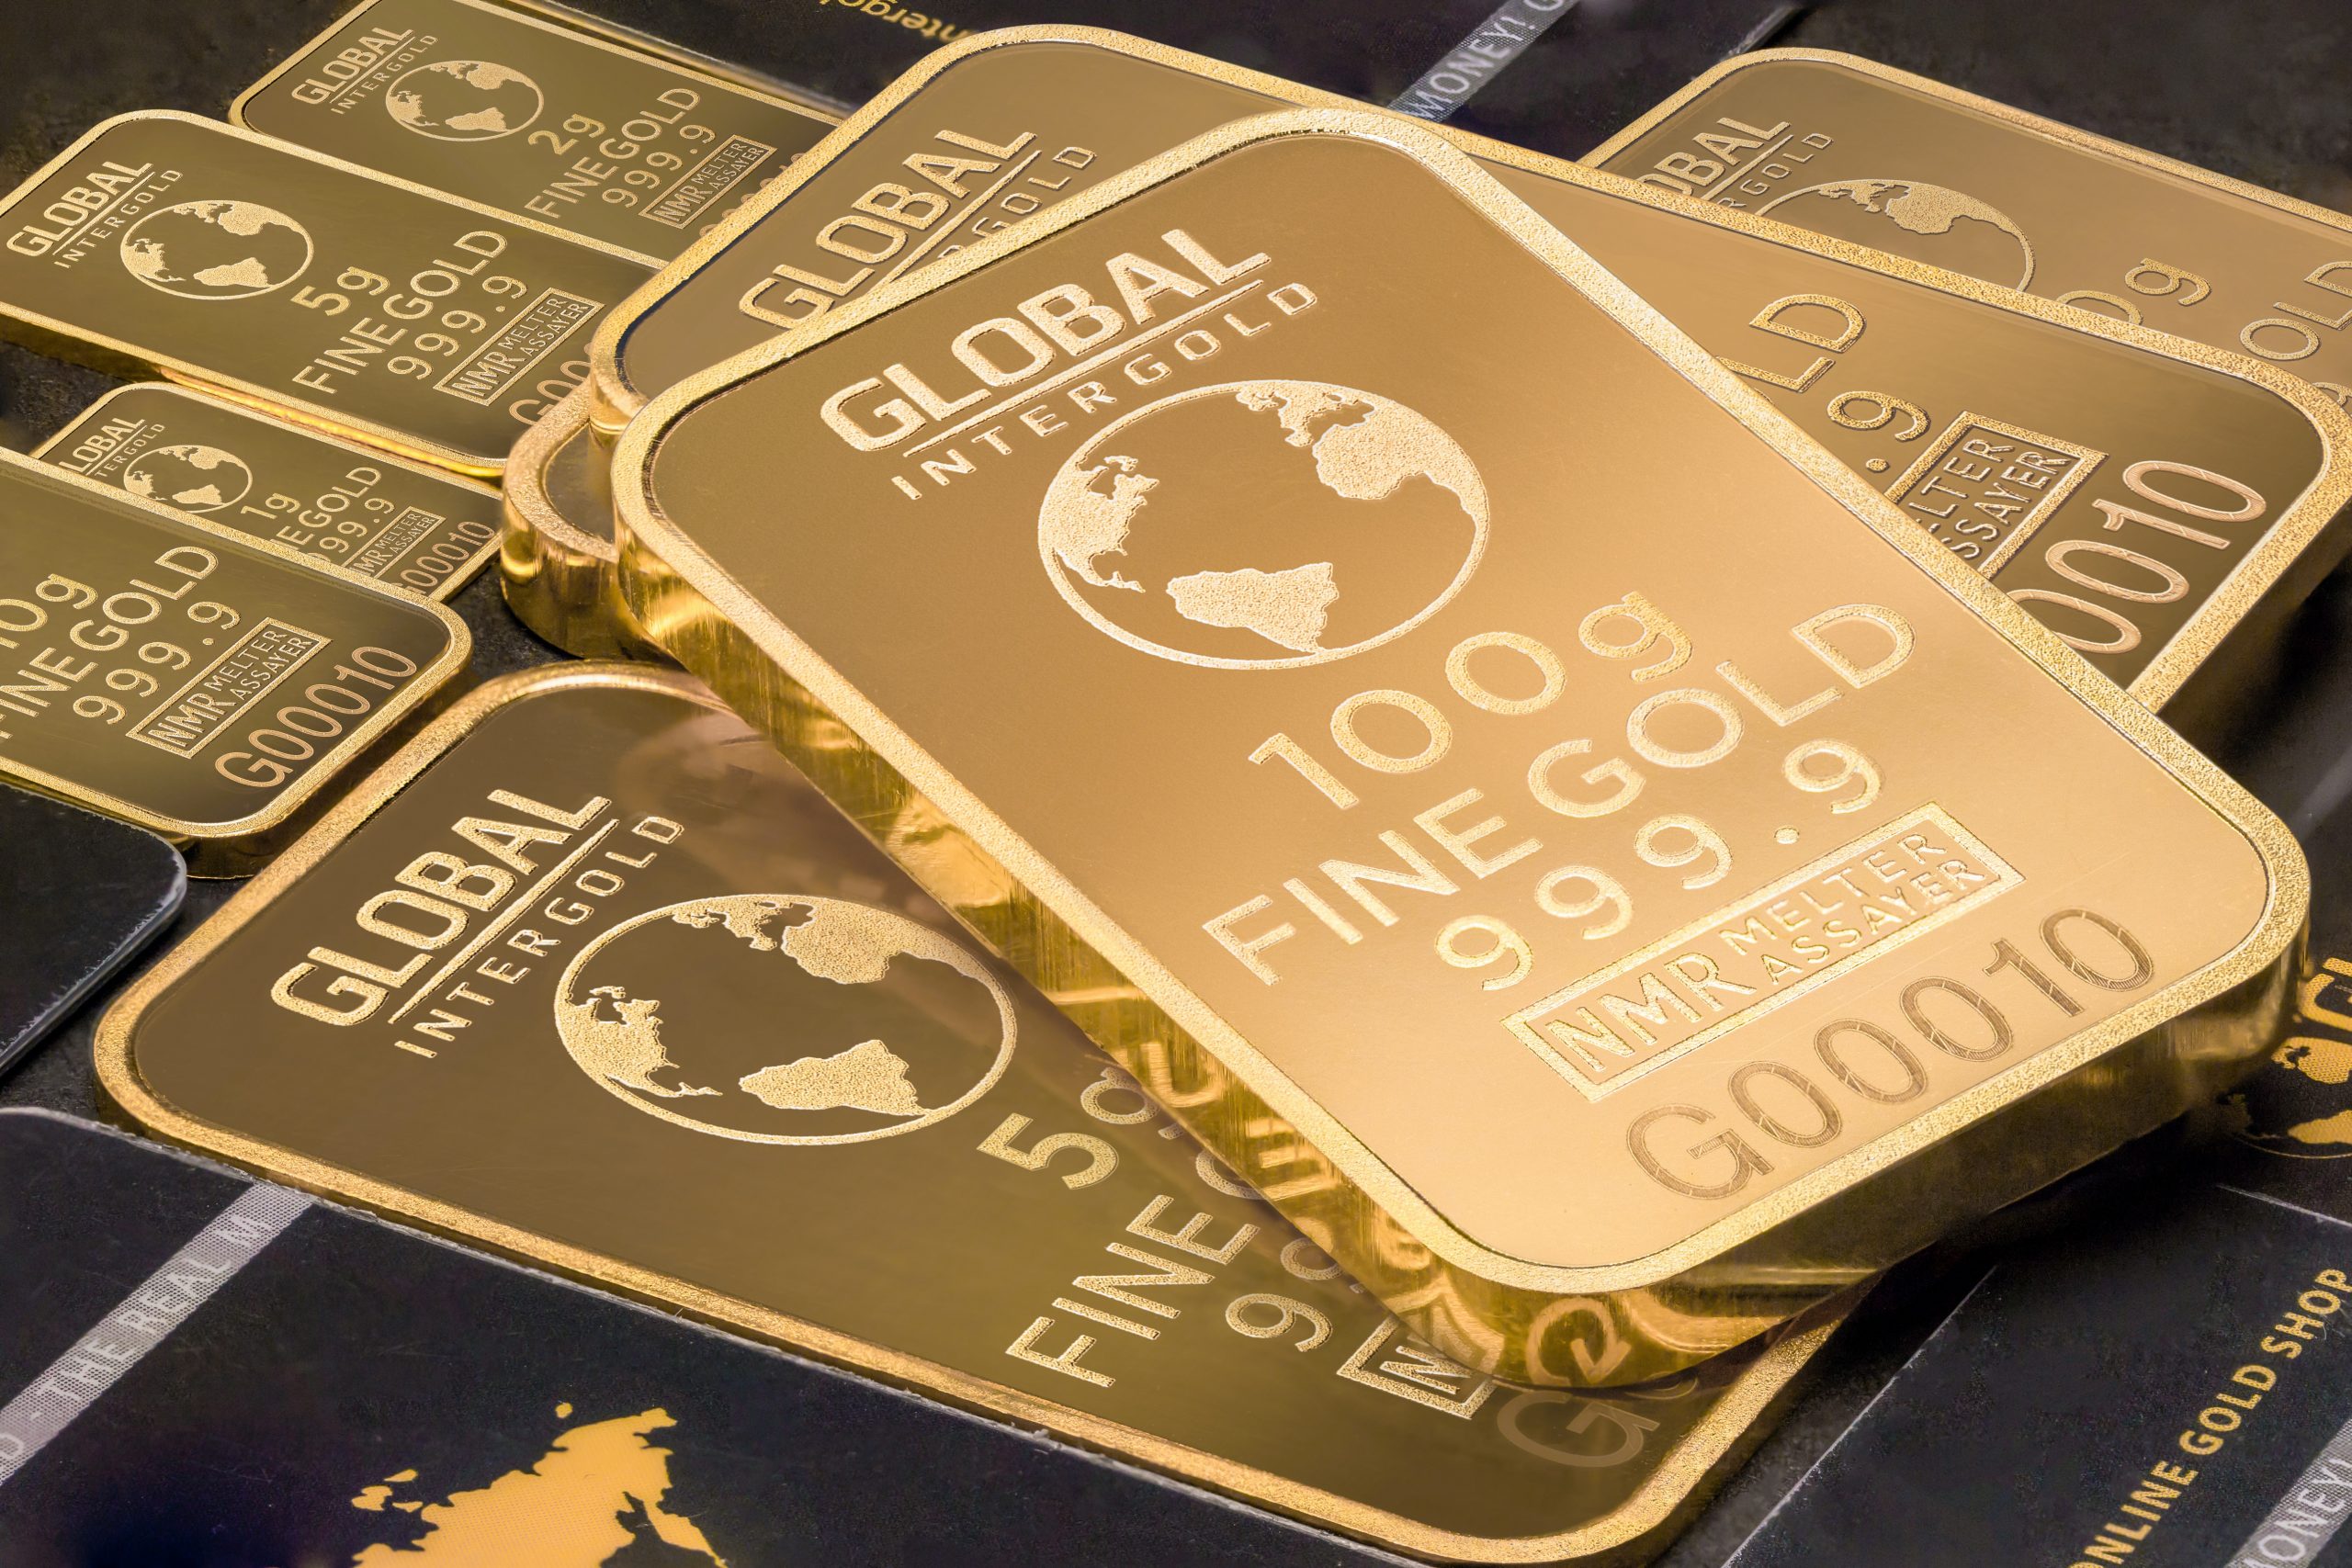 Gold surges above 2,000 USD, seems unstoppable